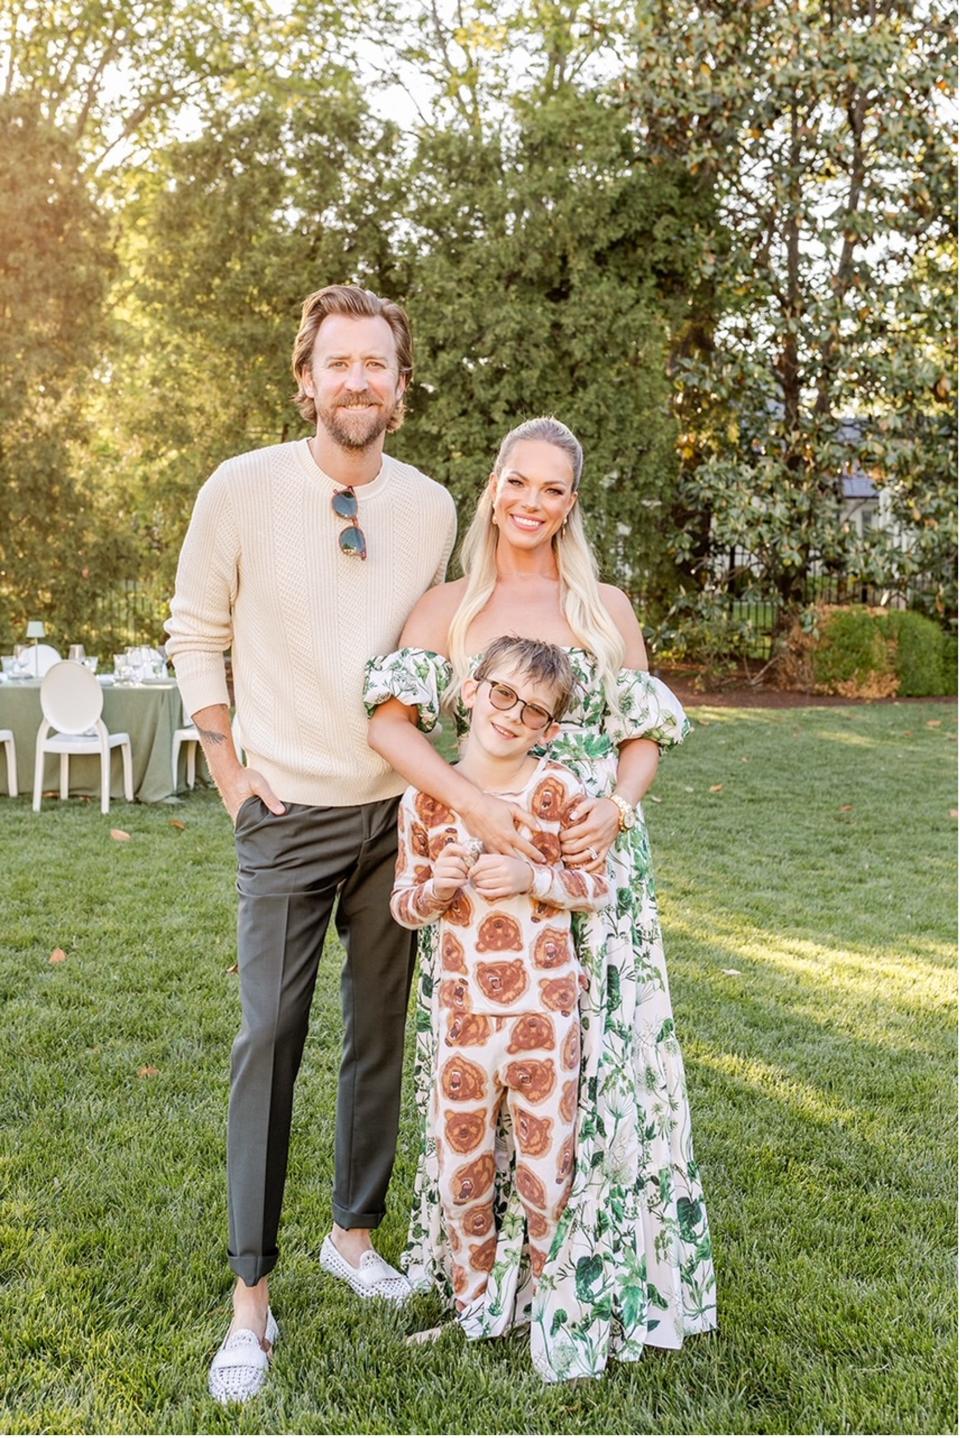 Lady A singer Charles Kelley with his wife, Cassie, and their son, Ward